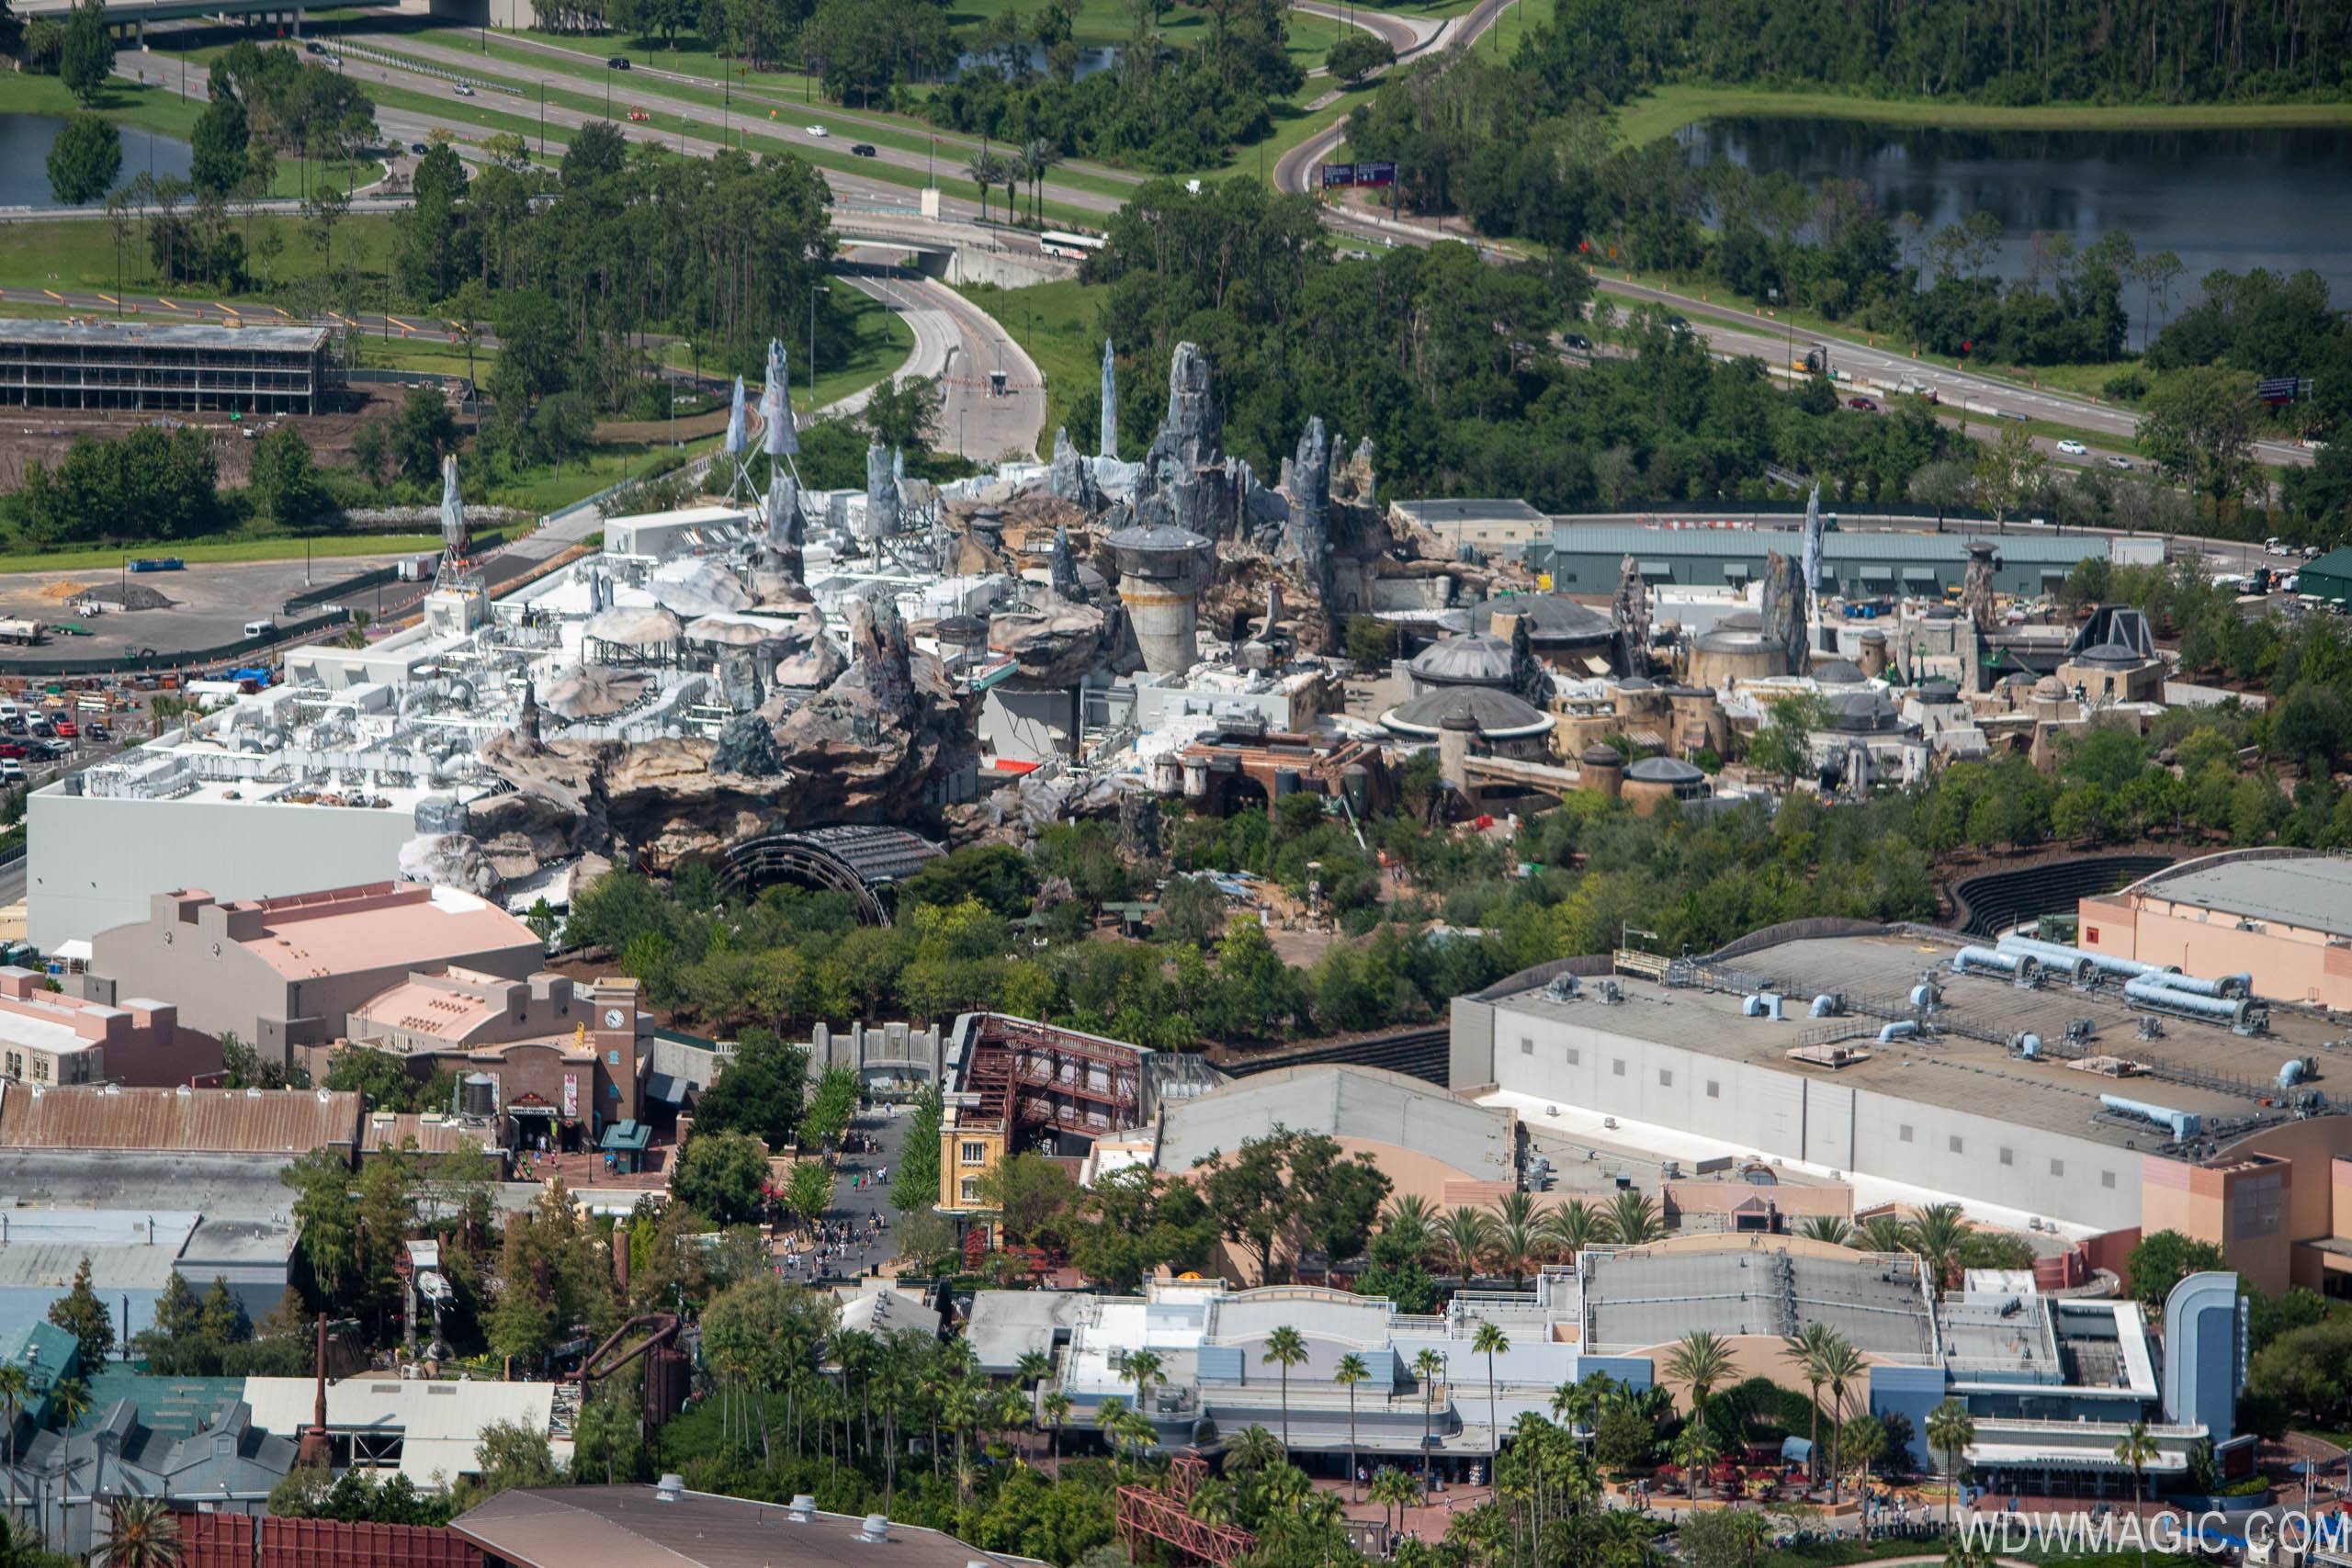 Star Wars Galaxy's Edge eventually found its home on the former backlot